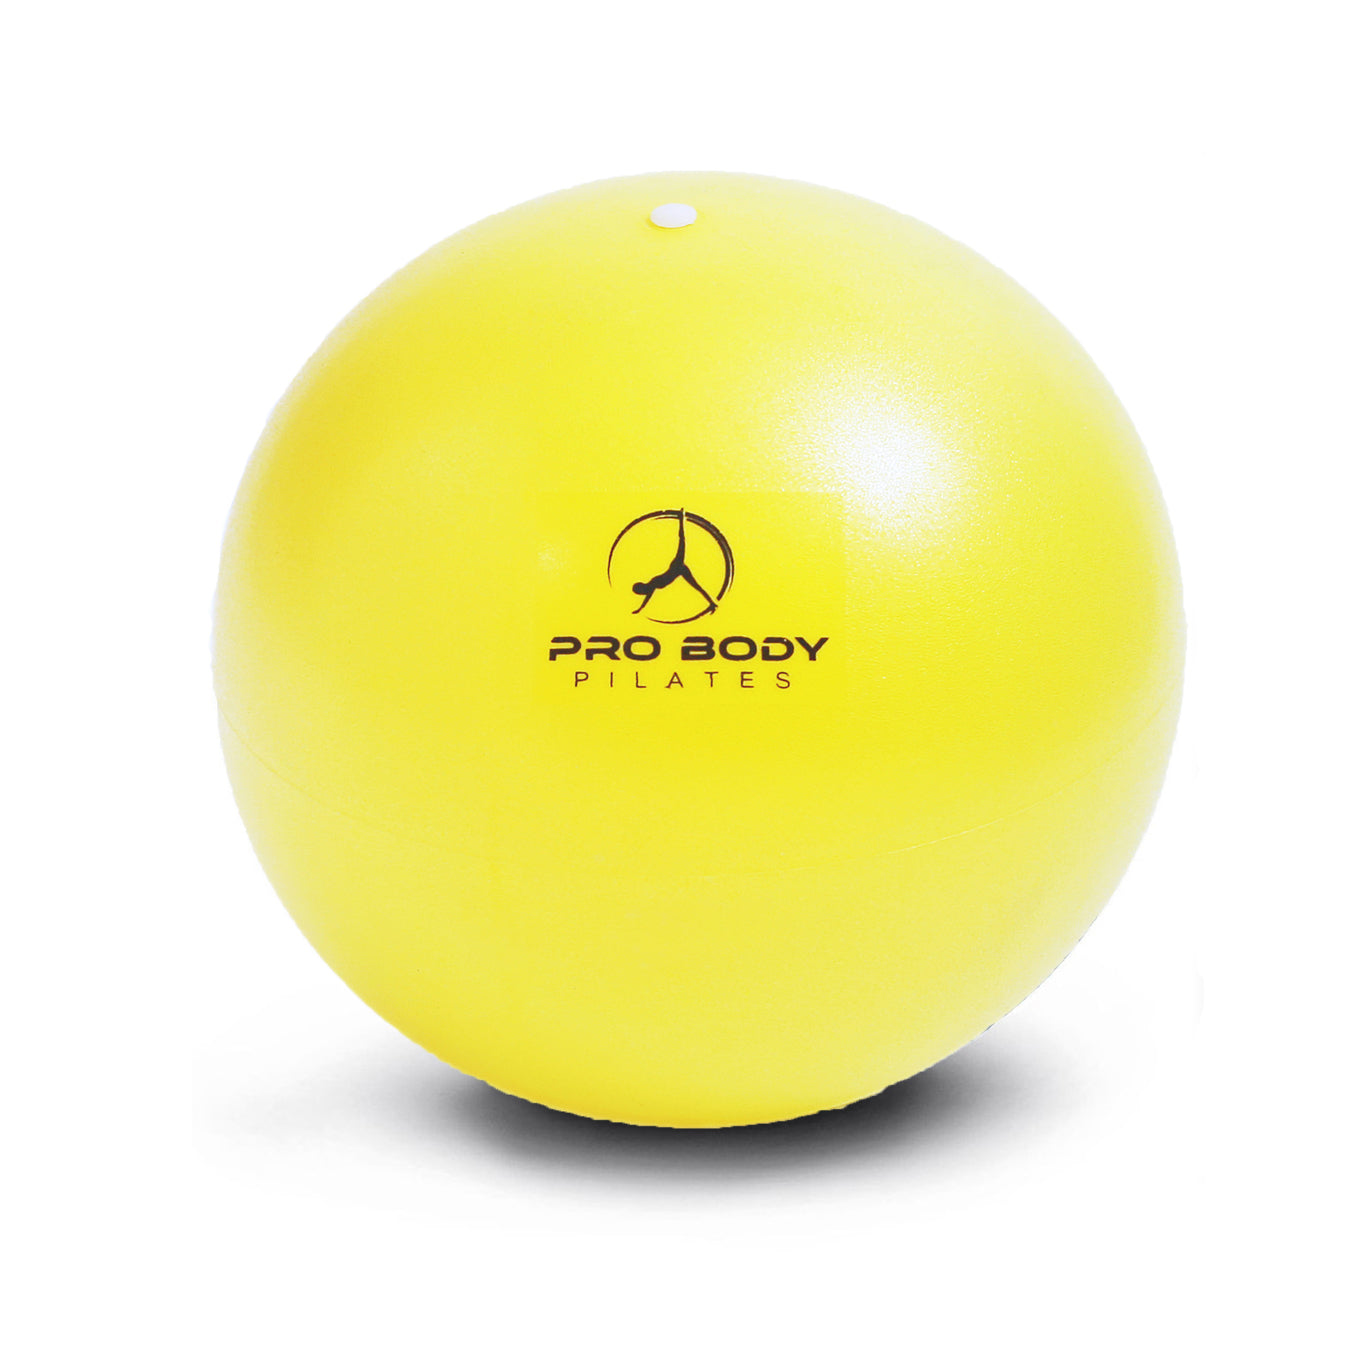 TopBine 9 Inch Exercise Pilates Ball -(2 Pcs) Stability Ball for Yoga,  Barre, Training and Physical Therapy- Improves Balance, Core Strength, Back  Pain & Posture- Comes with Inflatable Straw